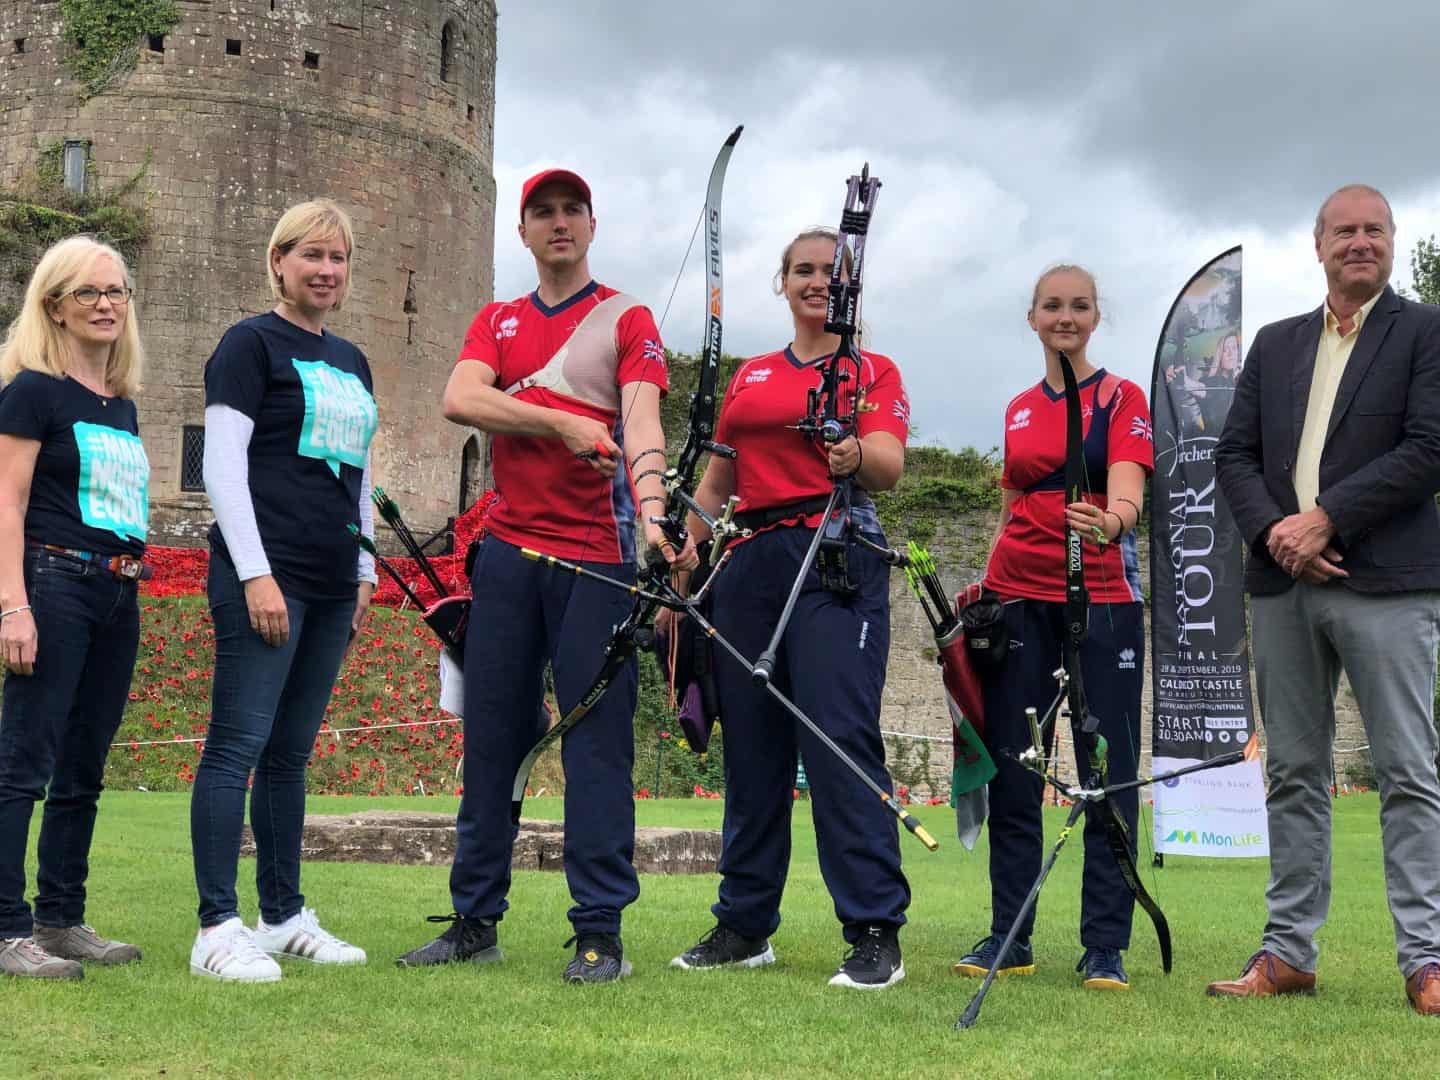 Archery GB, MonLife and Starling Bank join forces to host Archery National Tour Finals at Caldicot Castle